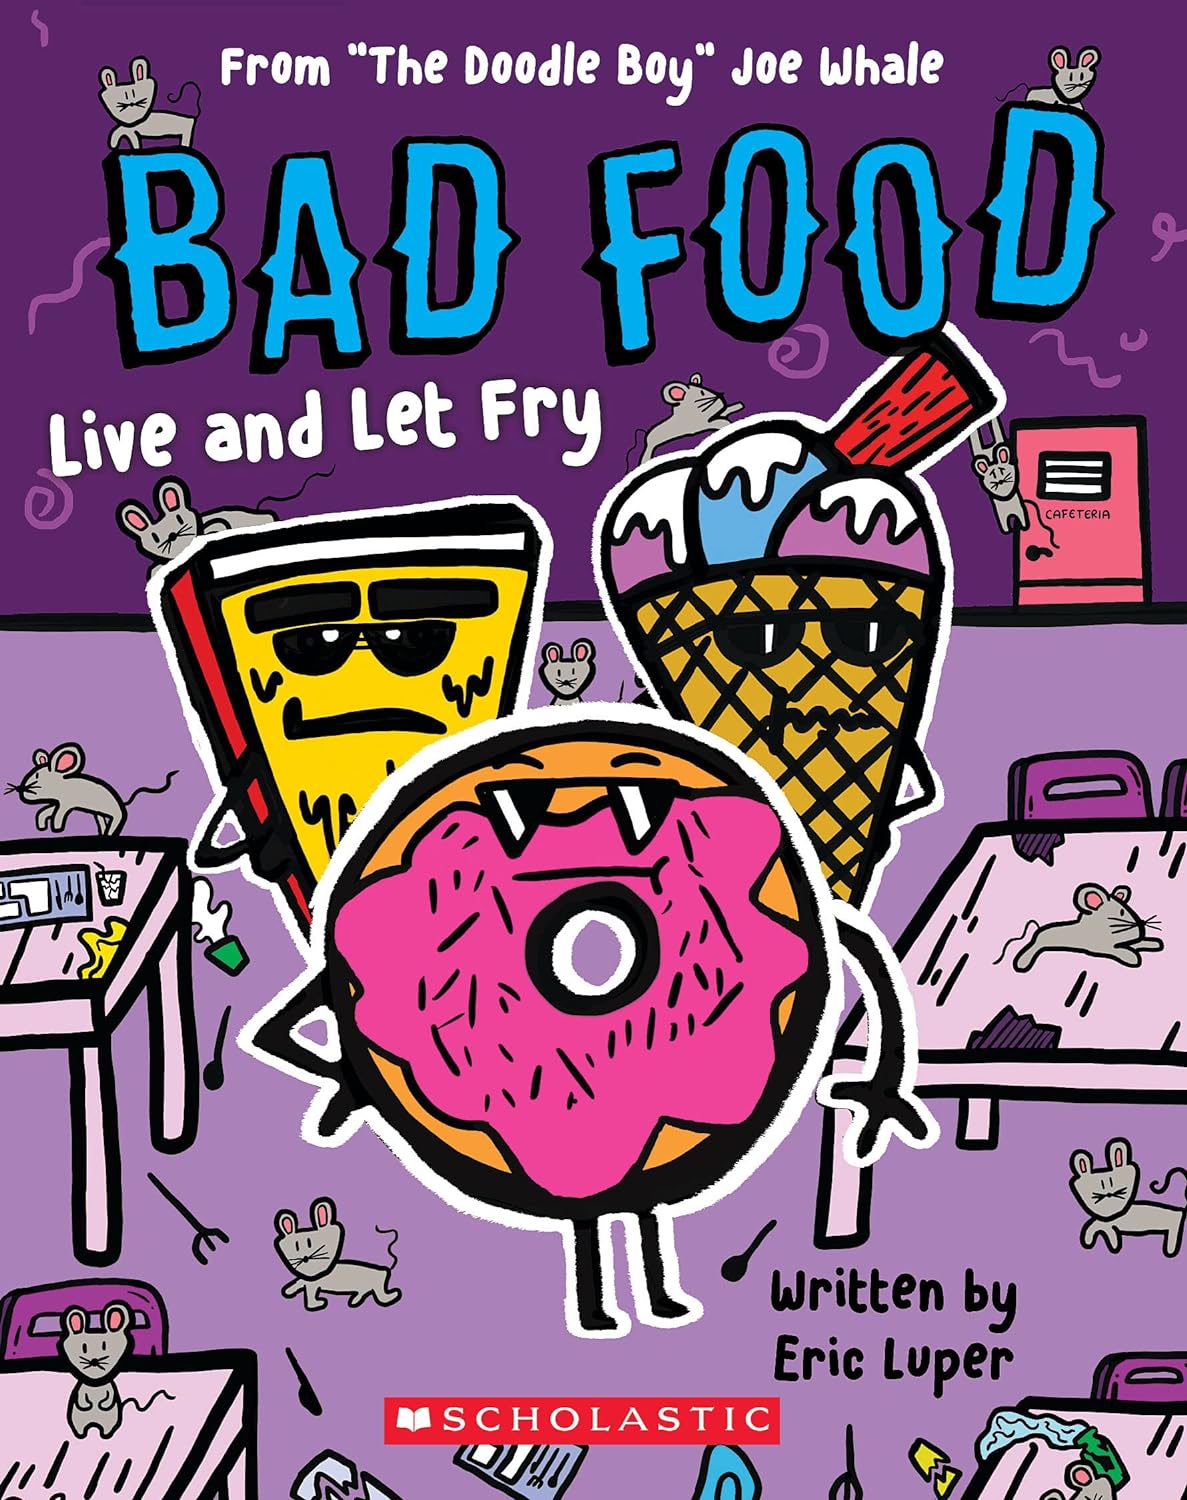 Bad Food #04:Live and Let Fry: From “The Doodle Boy” Joe Whale (P)